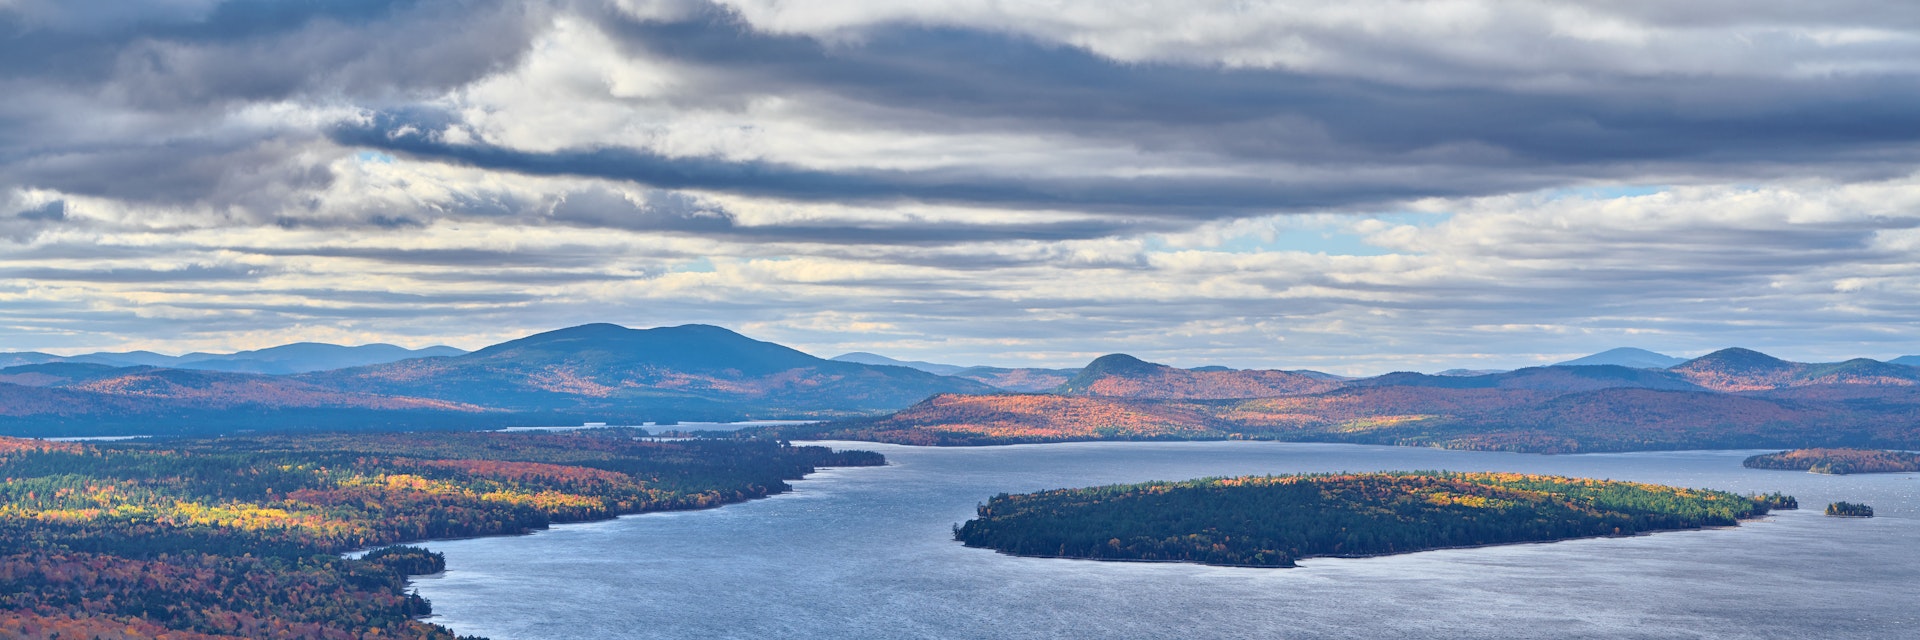 Mooselookmeguntic Lake at autumn view from Height of the Land viewpoint, Maine, USA.